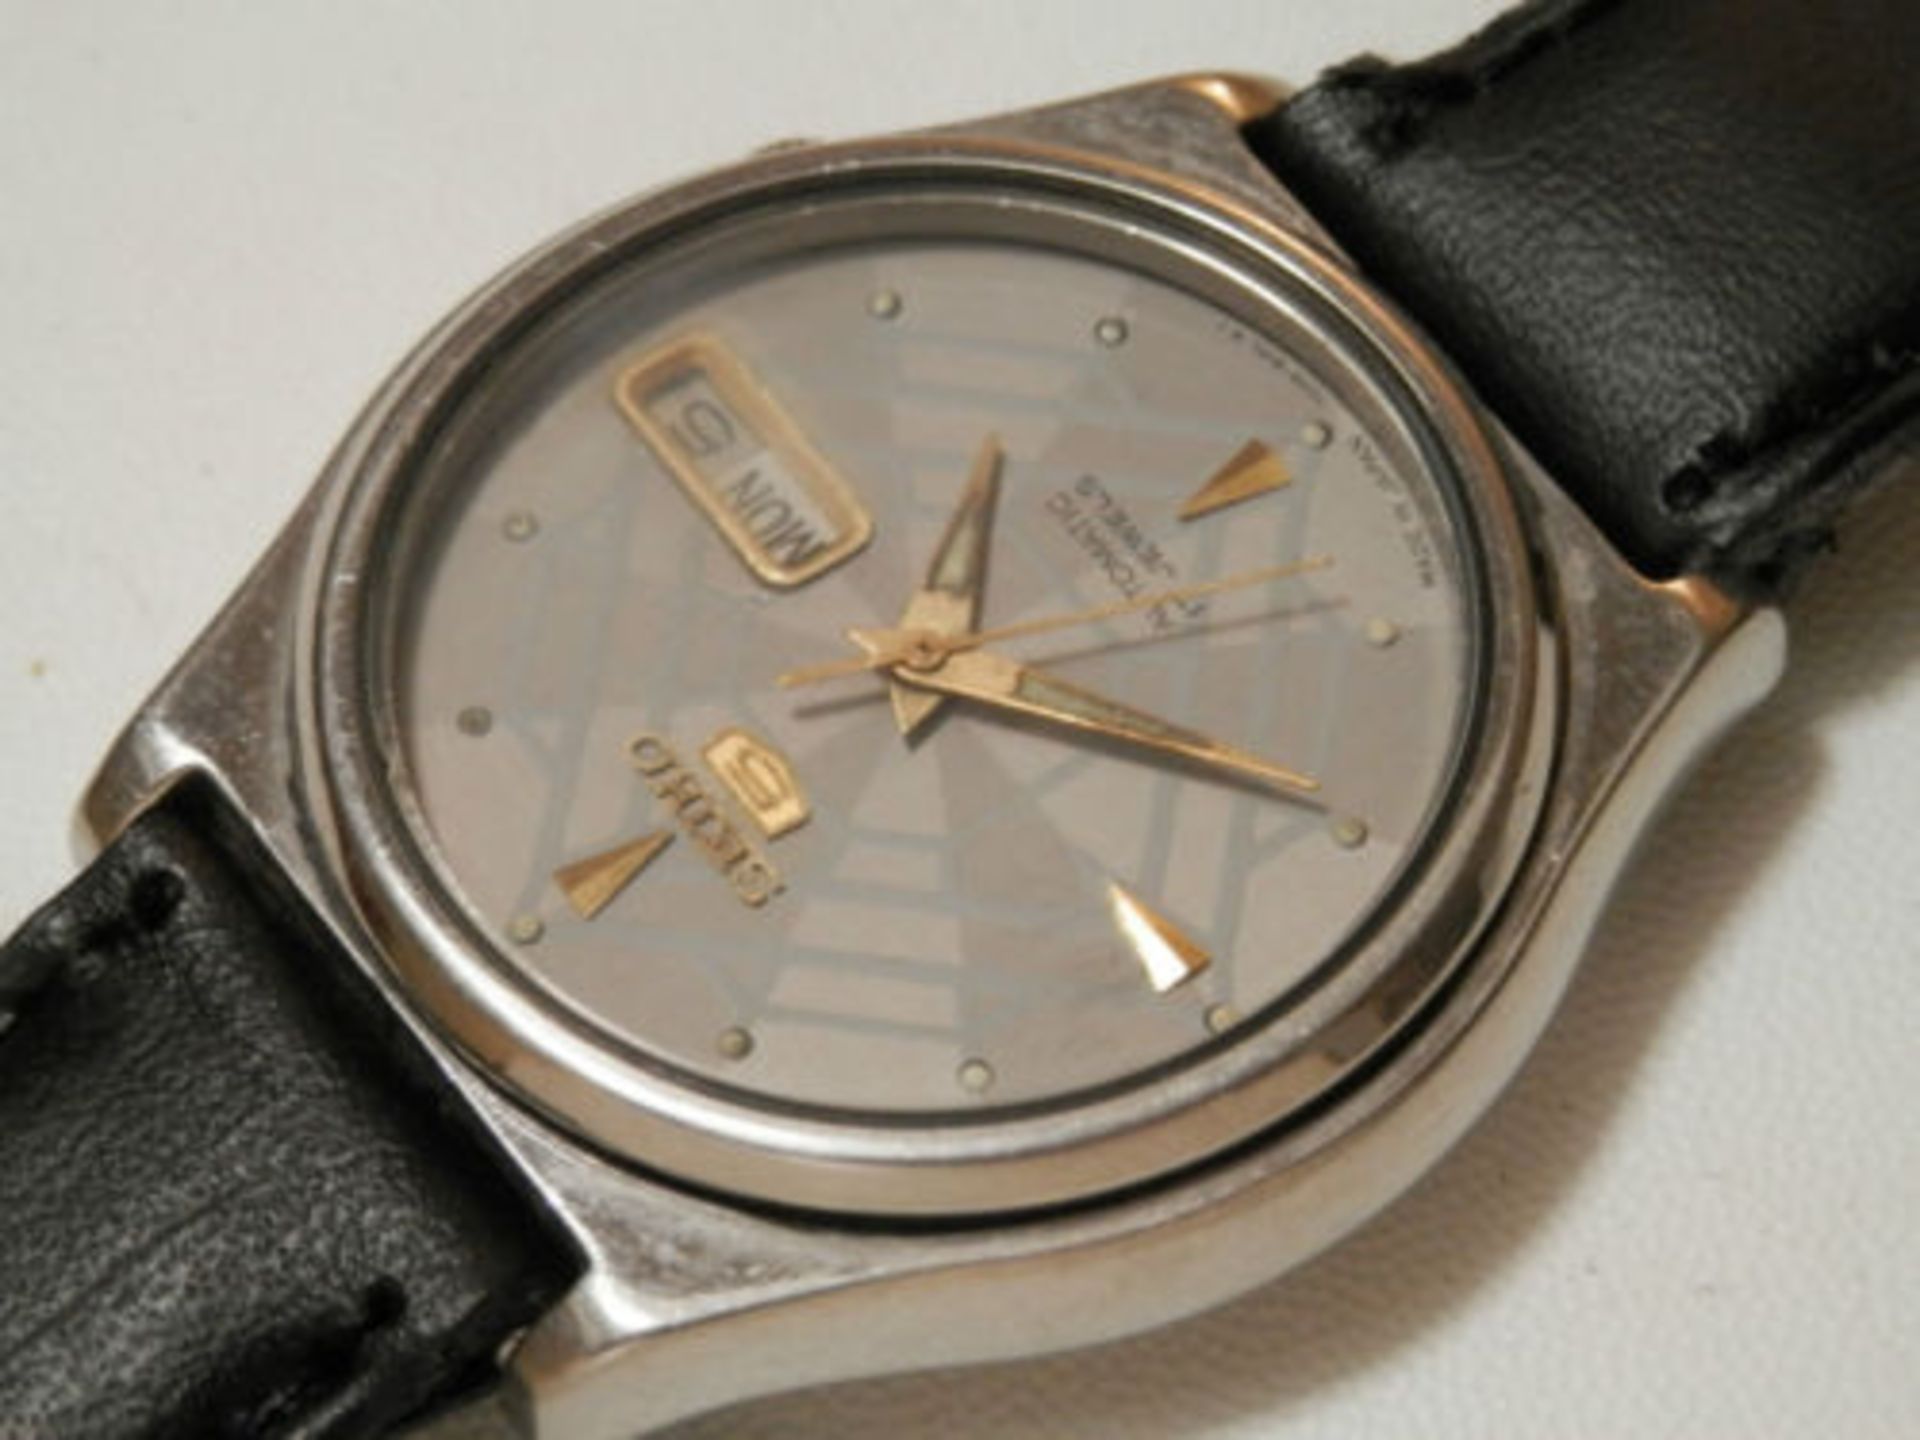 1984 WORKING SEIKO 7009 AUTOMATIC 17 JEWEL DAY/DATE WATCH, STAINLESS CASE. - Image 11 of 13